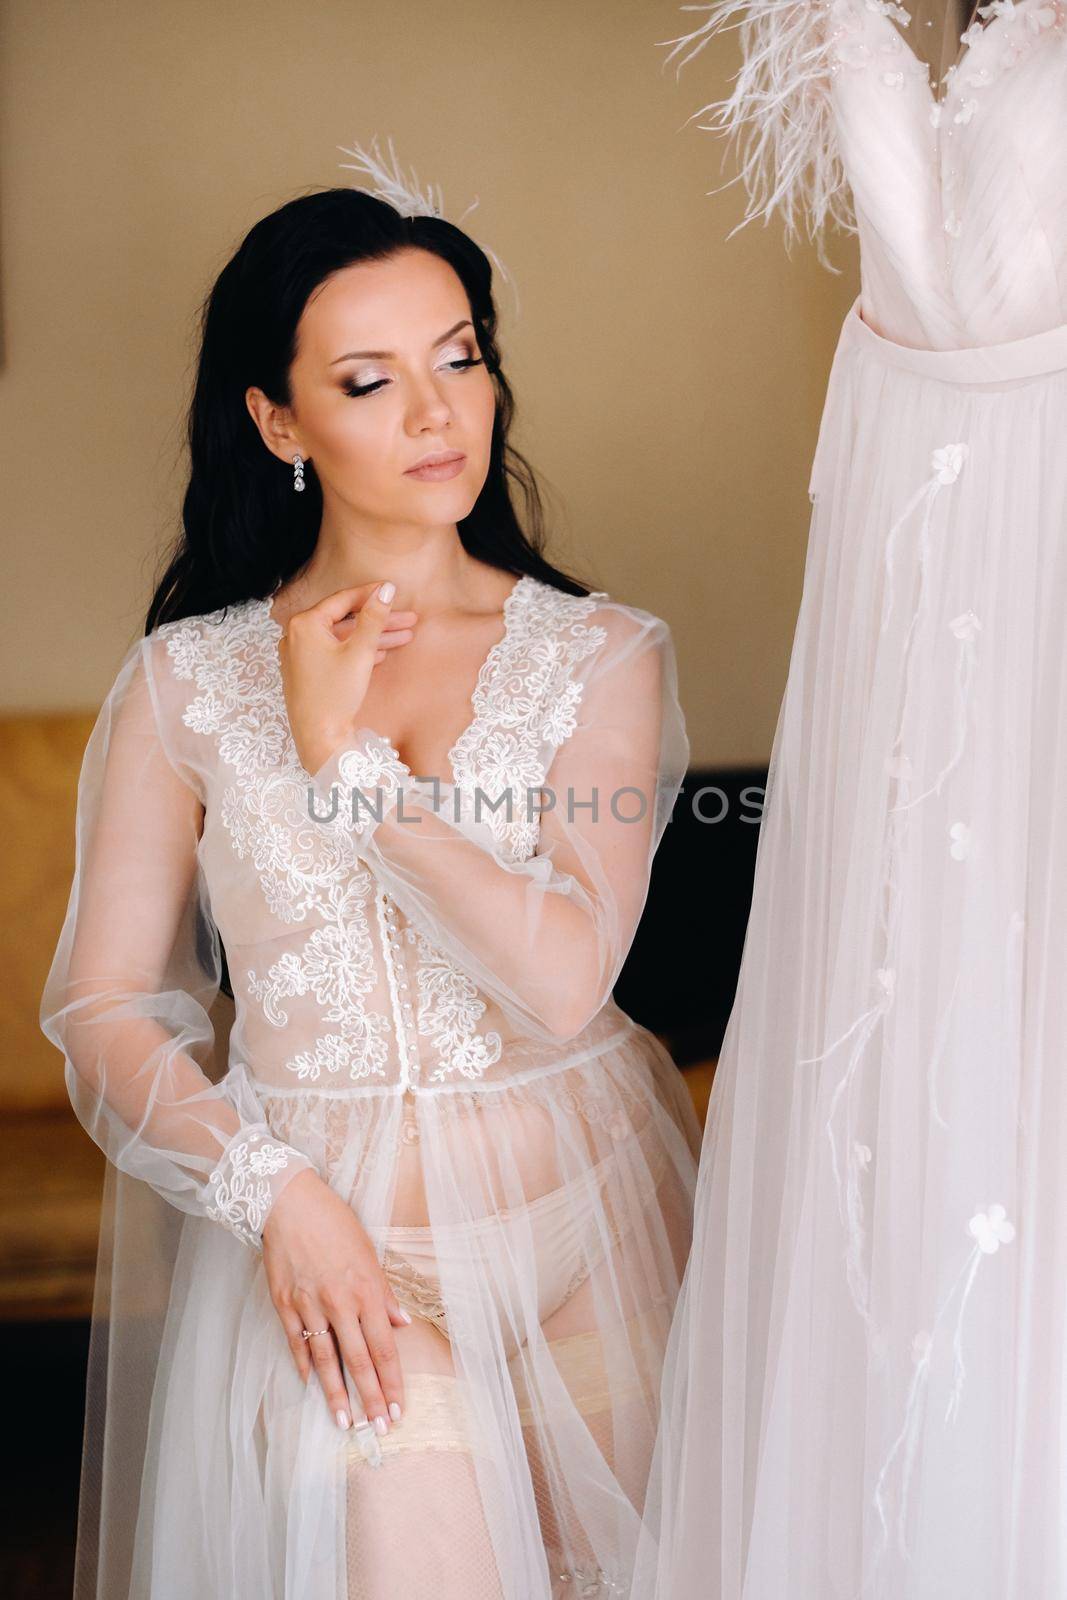 the bride, dressed in a boudoir transparent dress and underwear, stands at home in the morning.